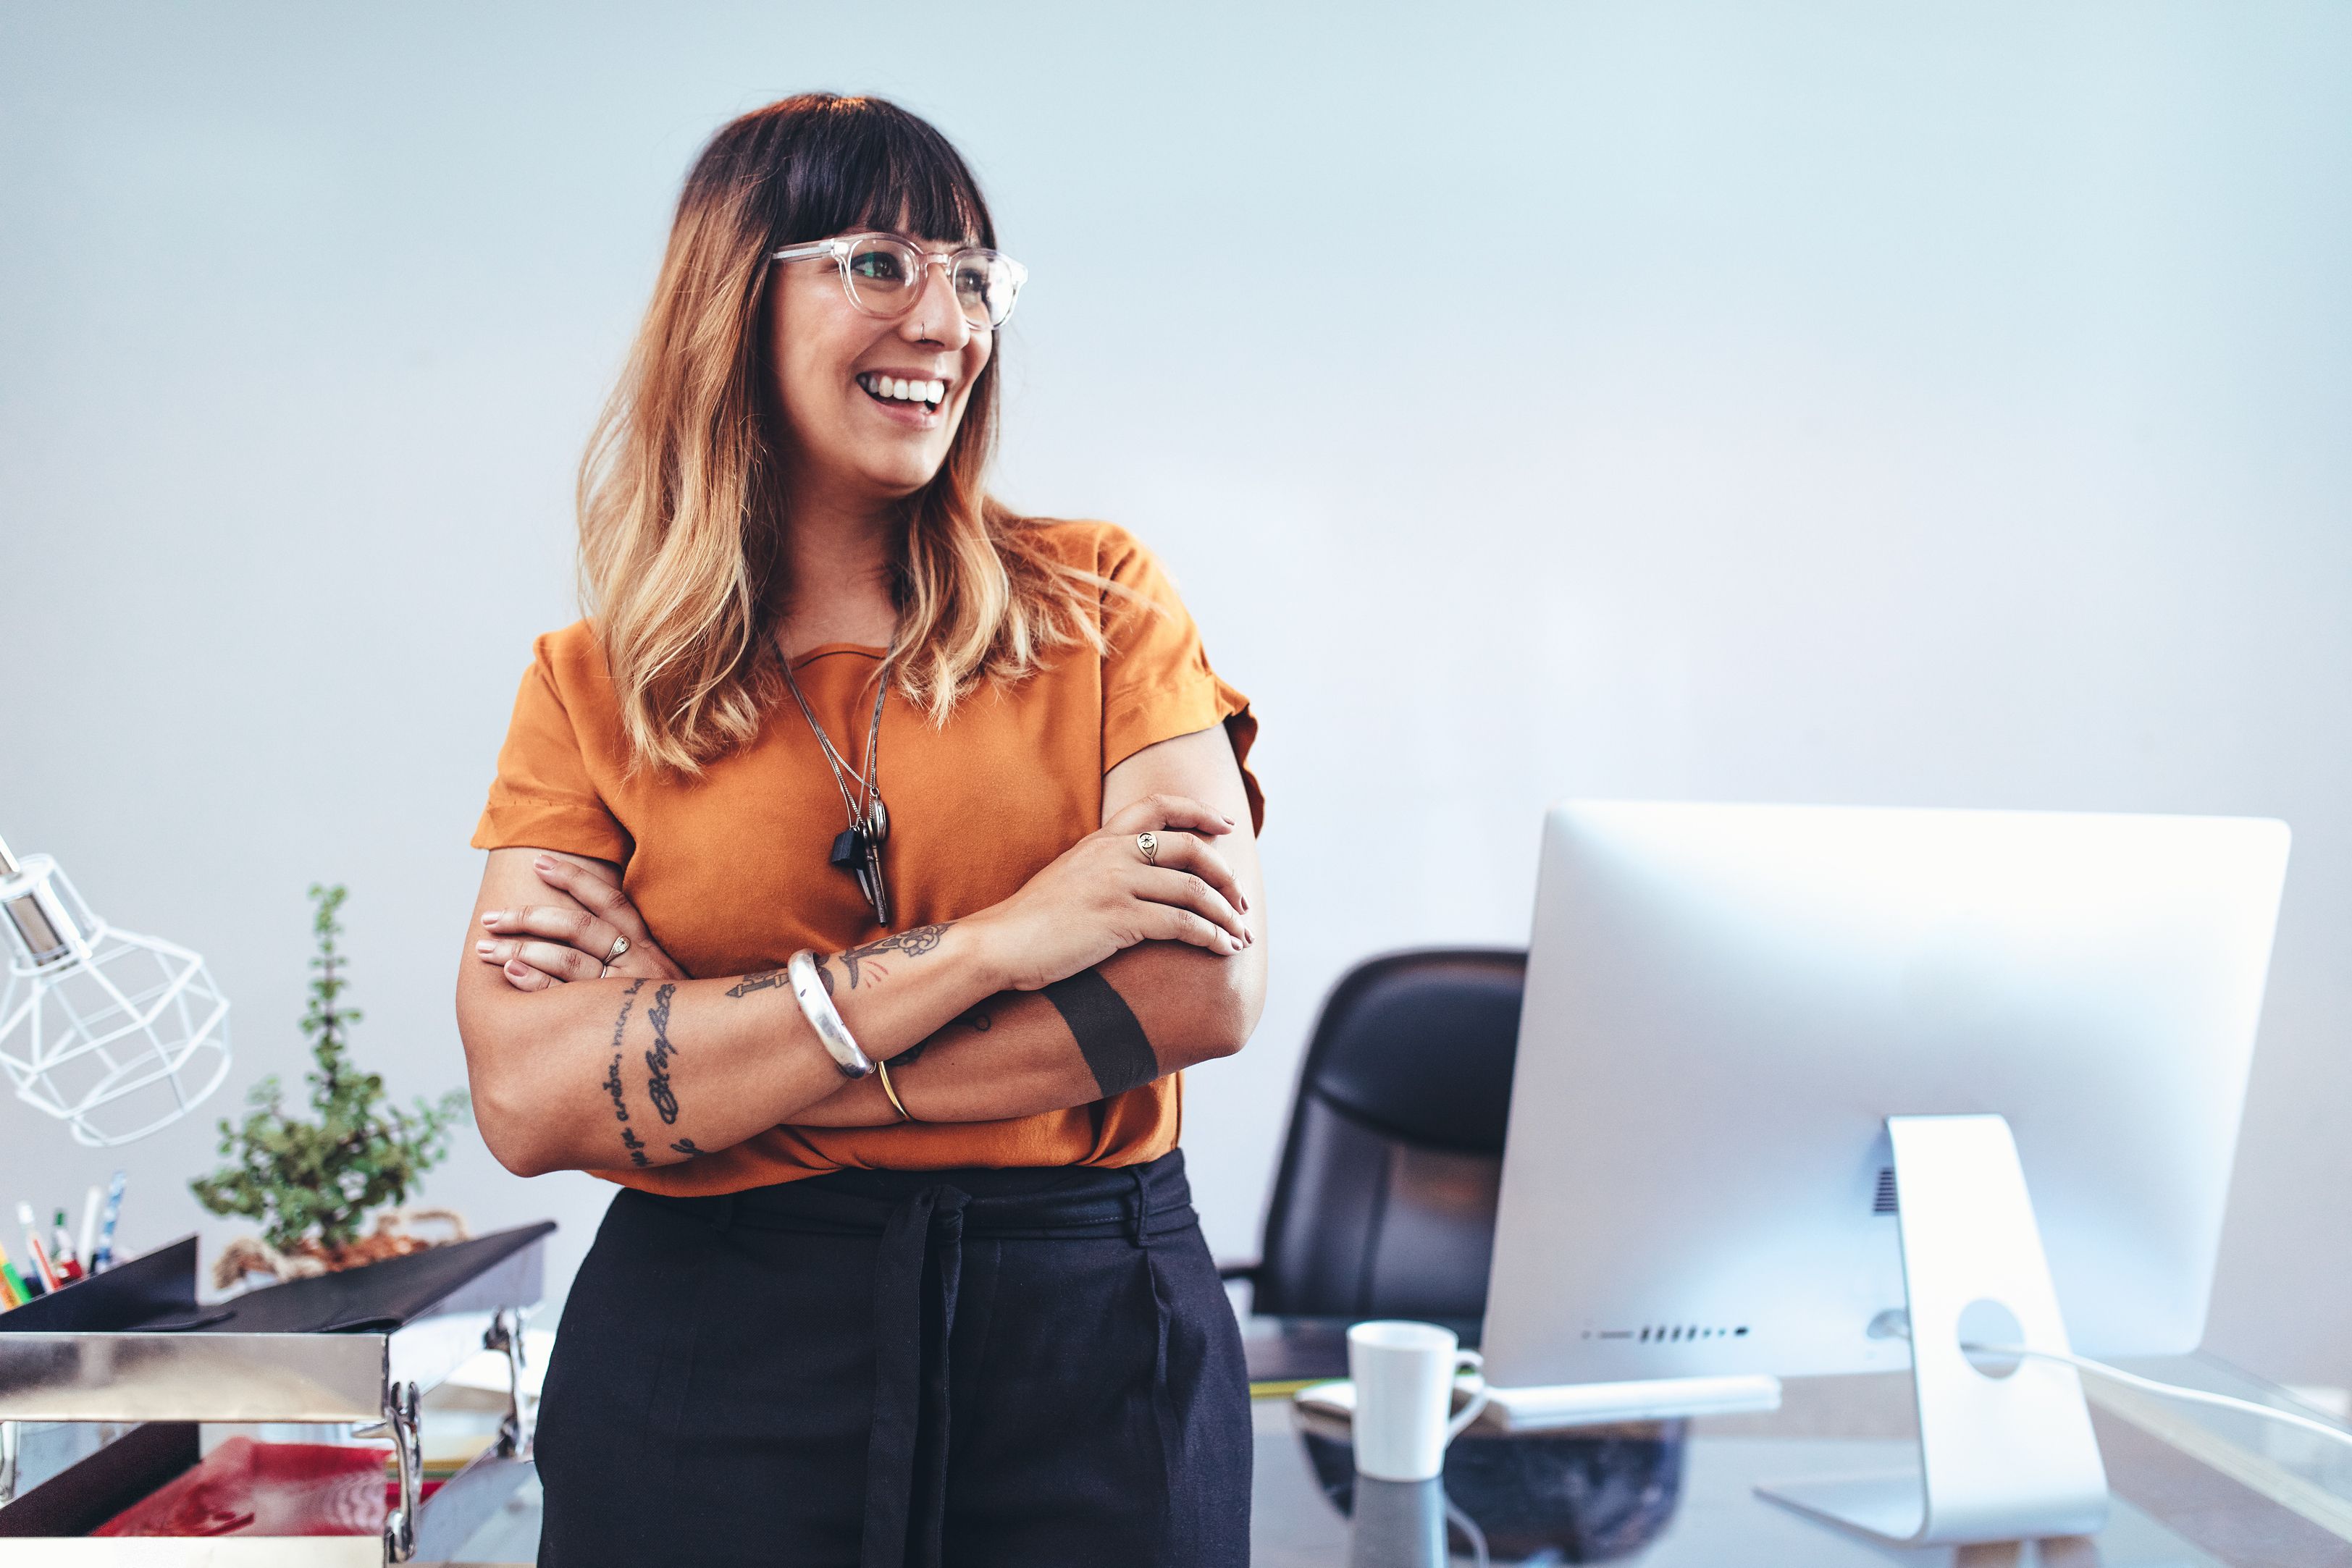 Portrait of a smiling businesswoman standing at her desk in office and looking away. Cheerful woman entrepreneur taking a break from work standing in her cabin at office.